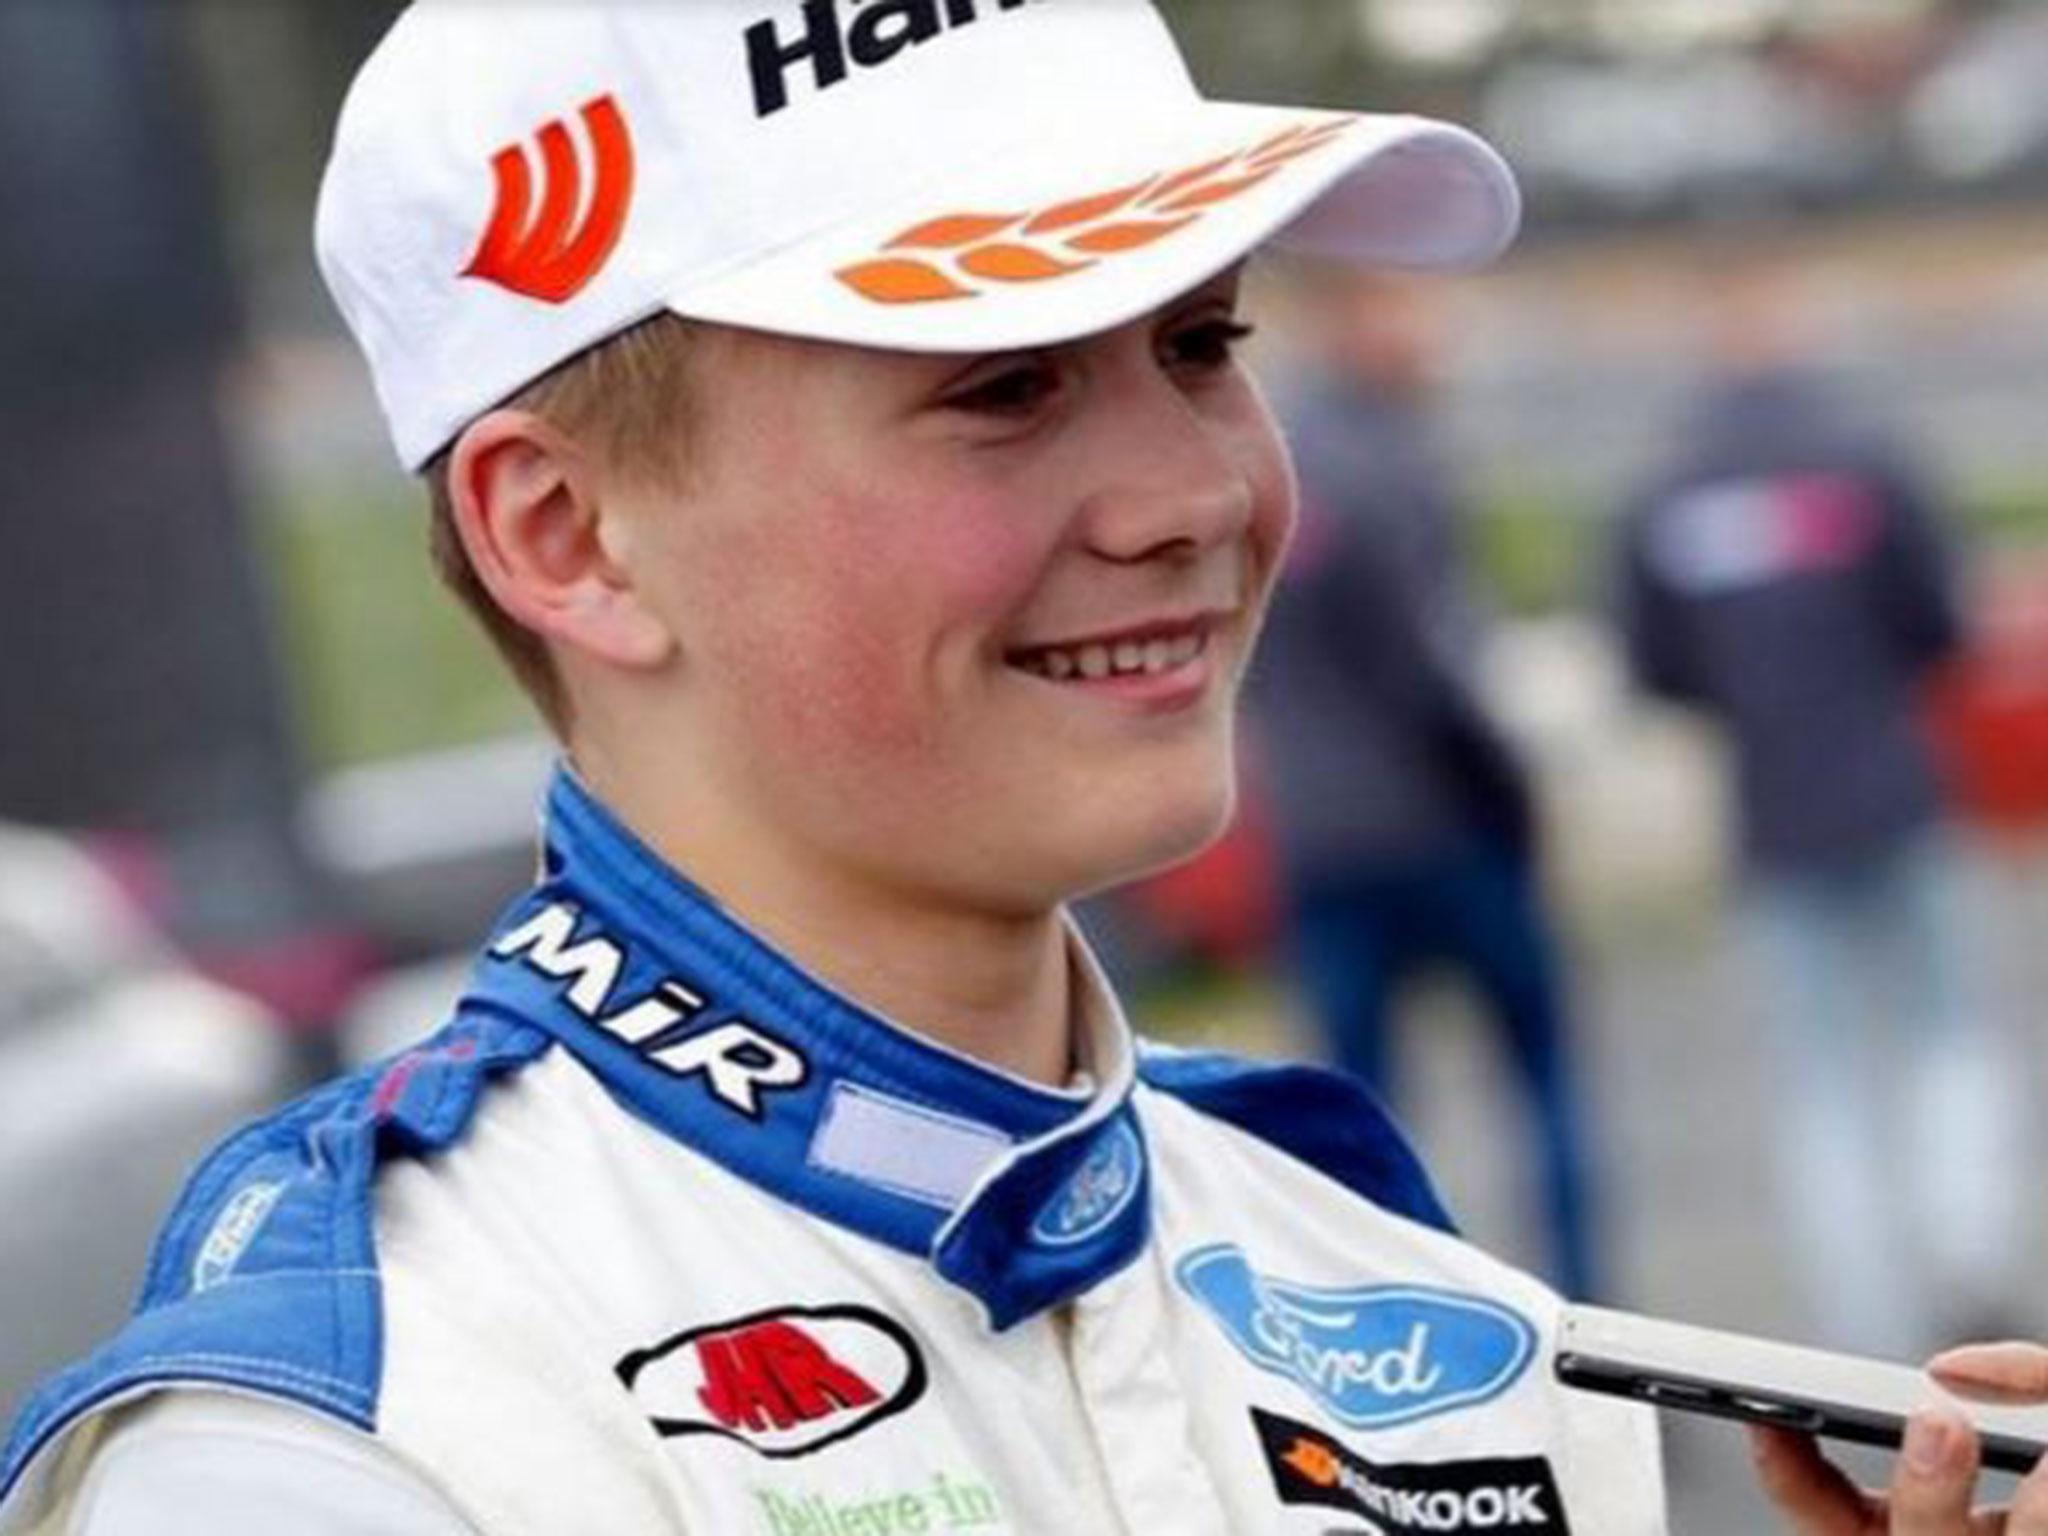 Billy Monger has thanked everyone for their support following the crash